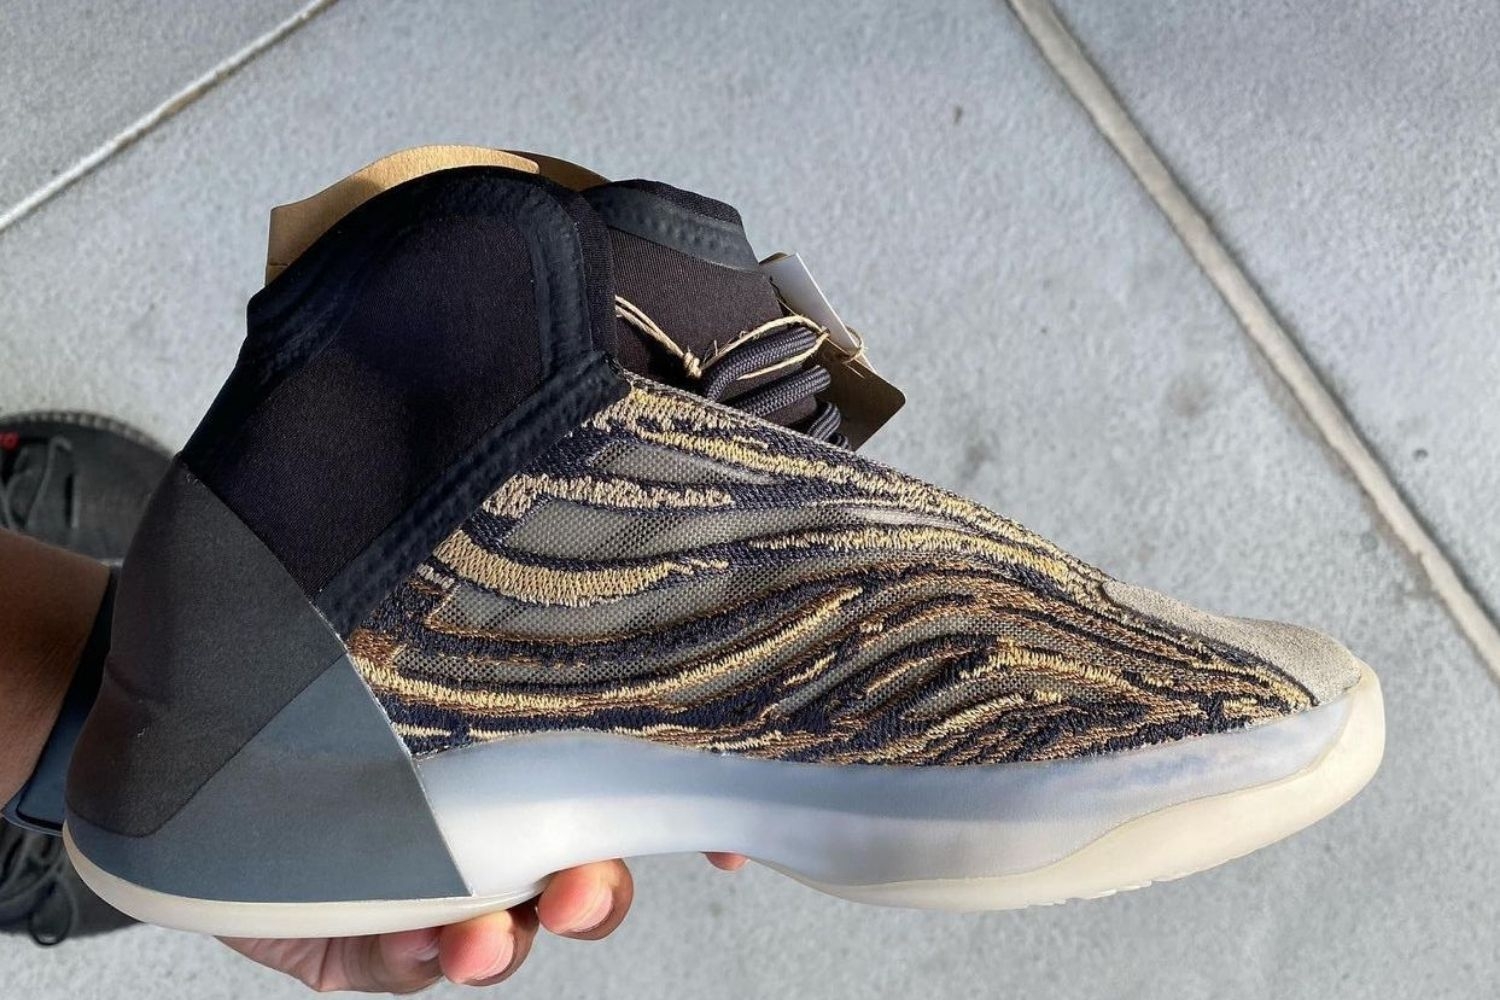 The adidas Yeezy Quantum gets an 'Amber Tint' colorway